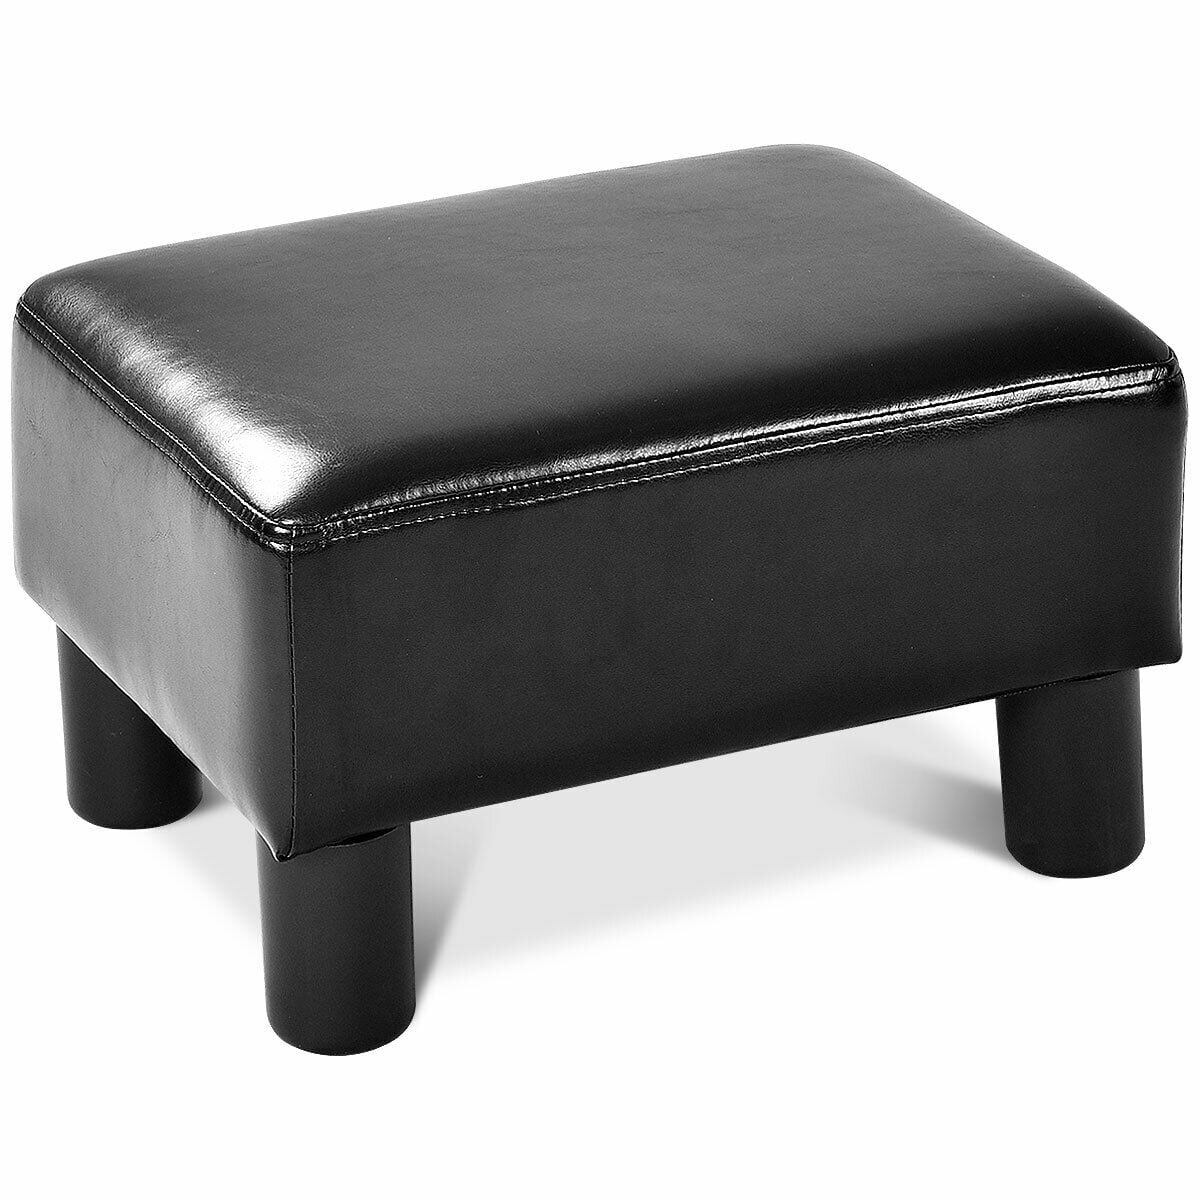 Apicizon Footstool Small Ottoman, 14.5 Rectangular Faux Leather Foot Stool  with Padded Seat for Couch Chair, Footrest Stool for High Beds,Under Desk